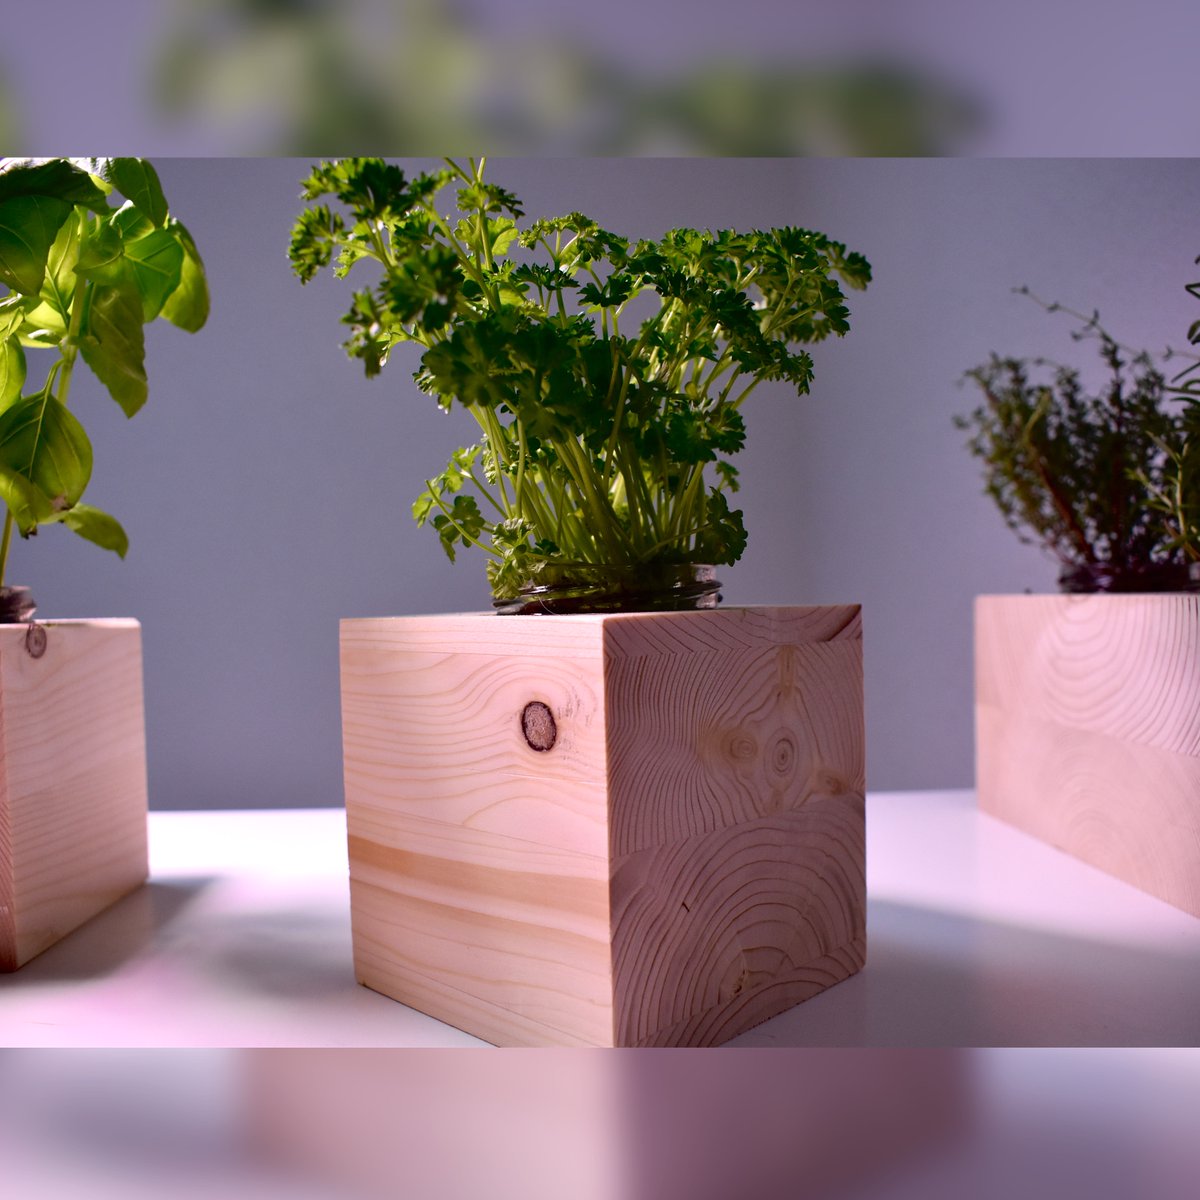 Our mini gardens consist of upcycled wood. ♻️ #indoorgarden #minigarden #wood #woodencube #upcycling #reuse #sustainability #startup #students